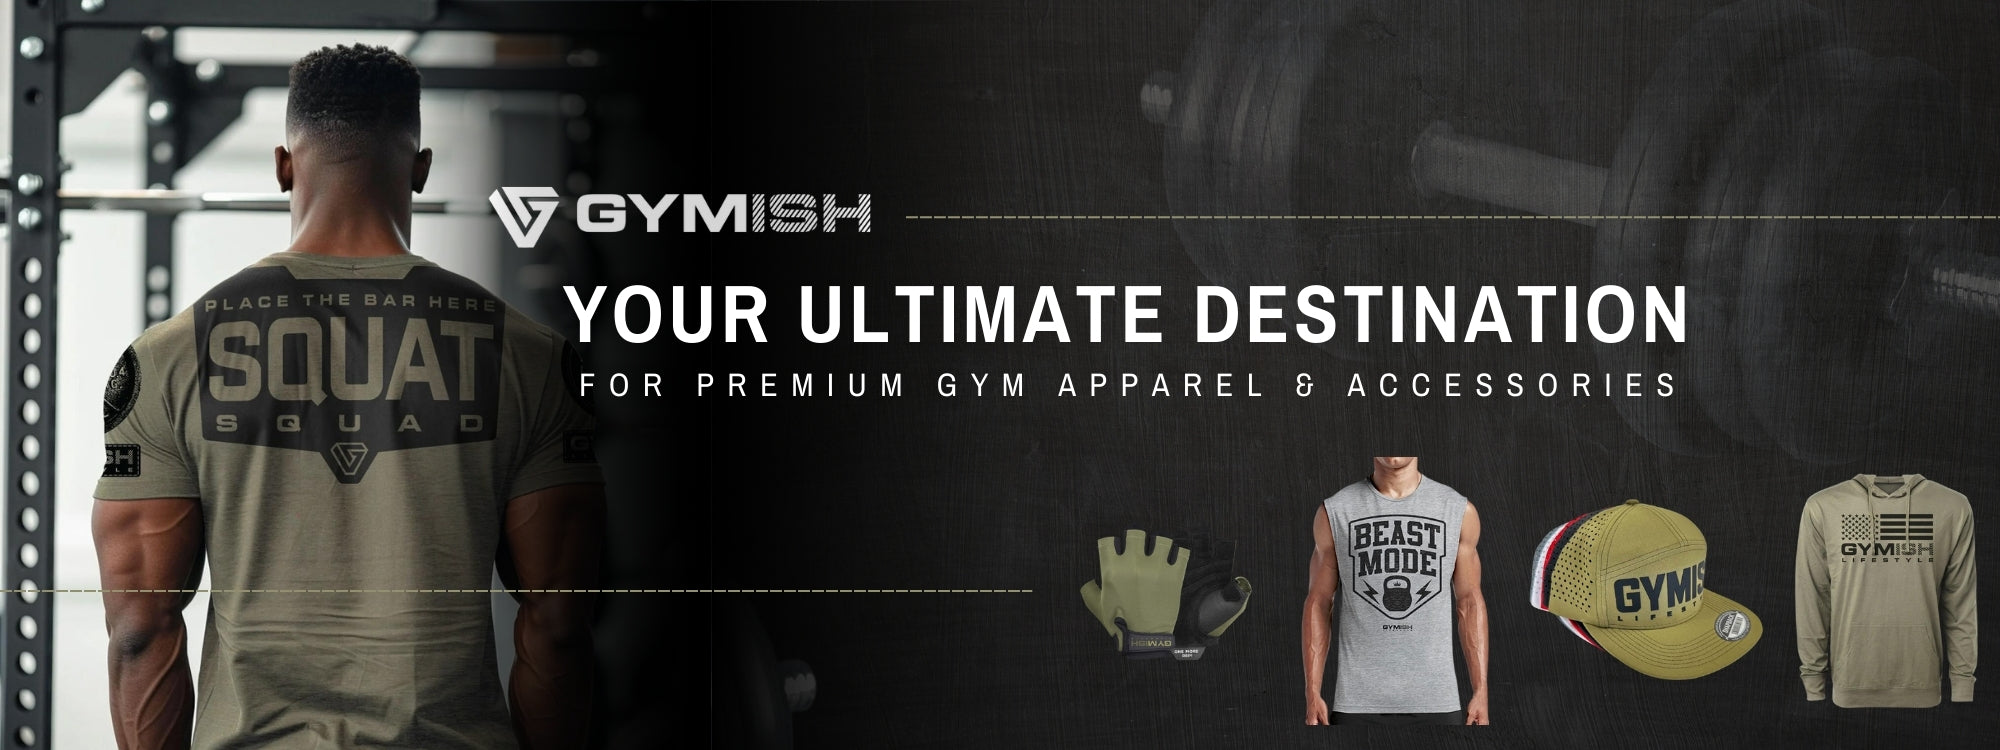 Your Ultimate Destination for Premium Gym Apparel and Accessories 